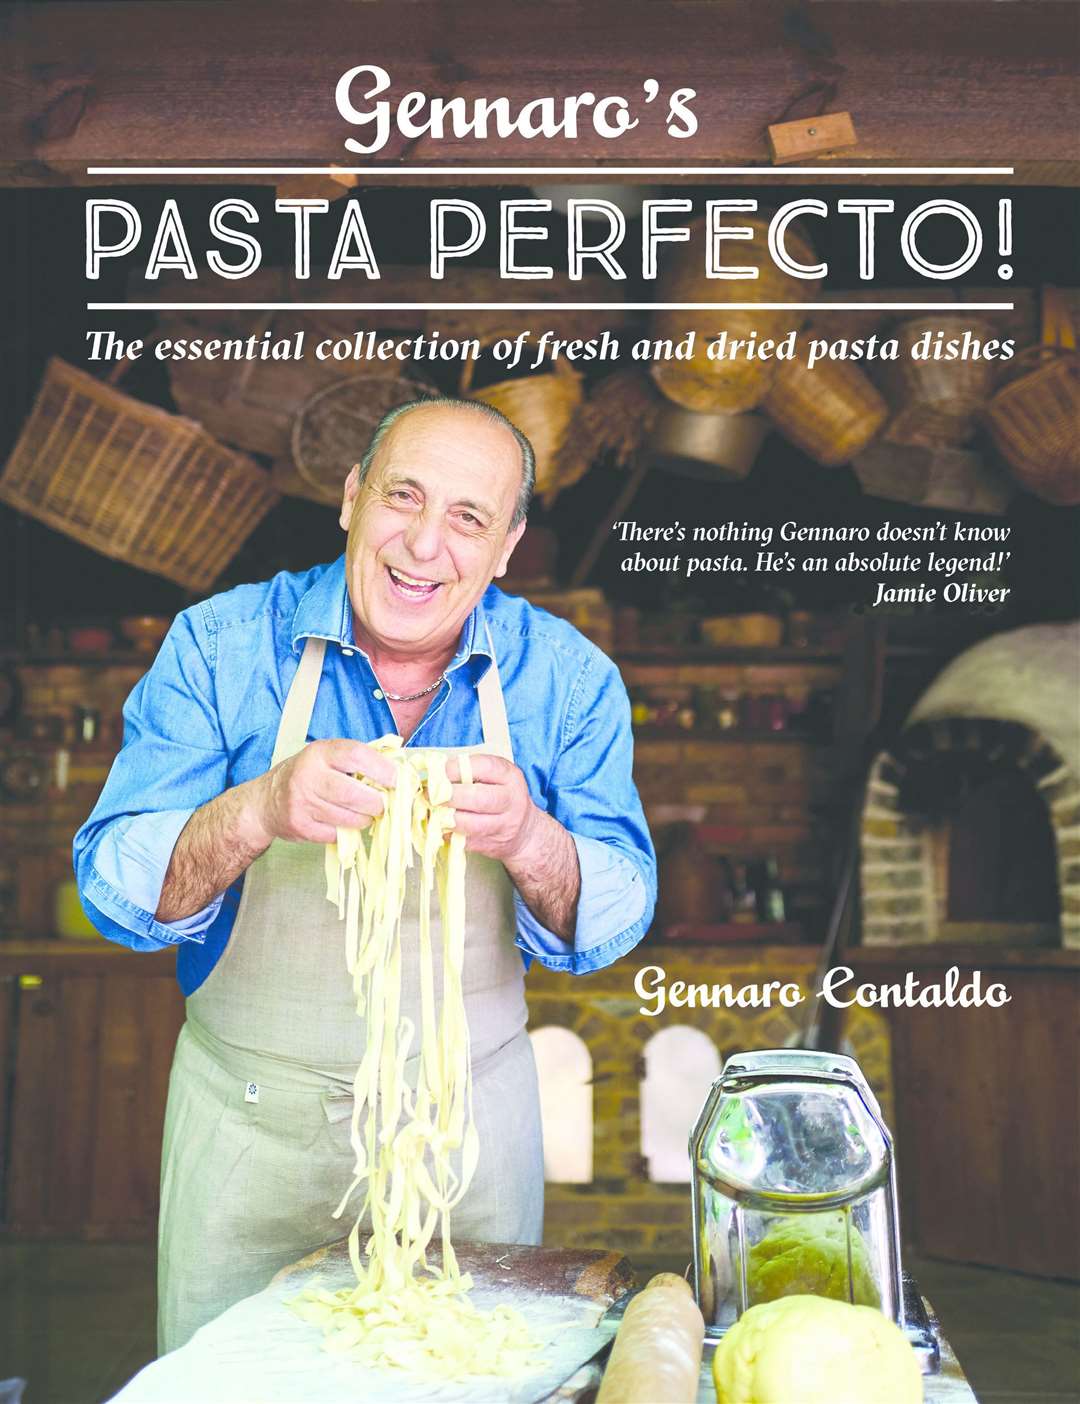 For Gennaro pasta is love to be shared